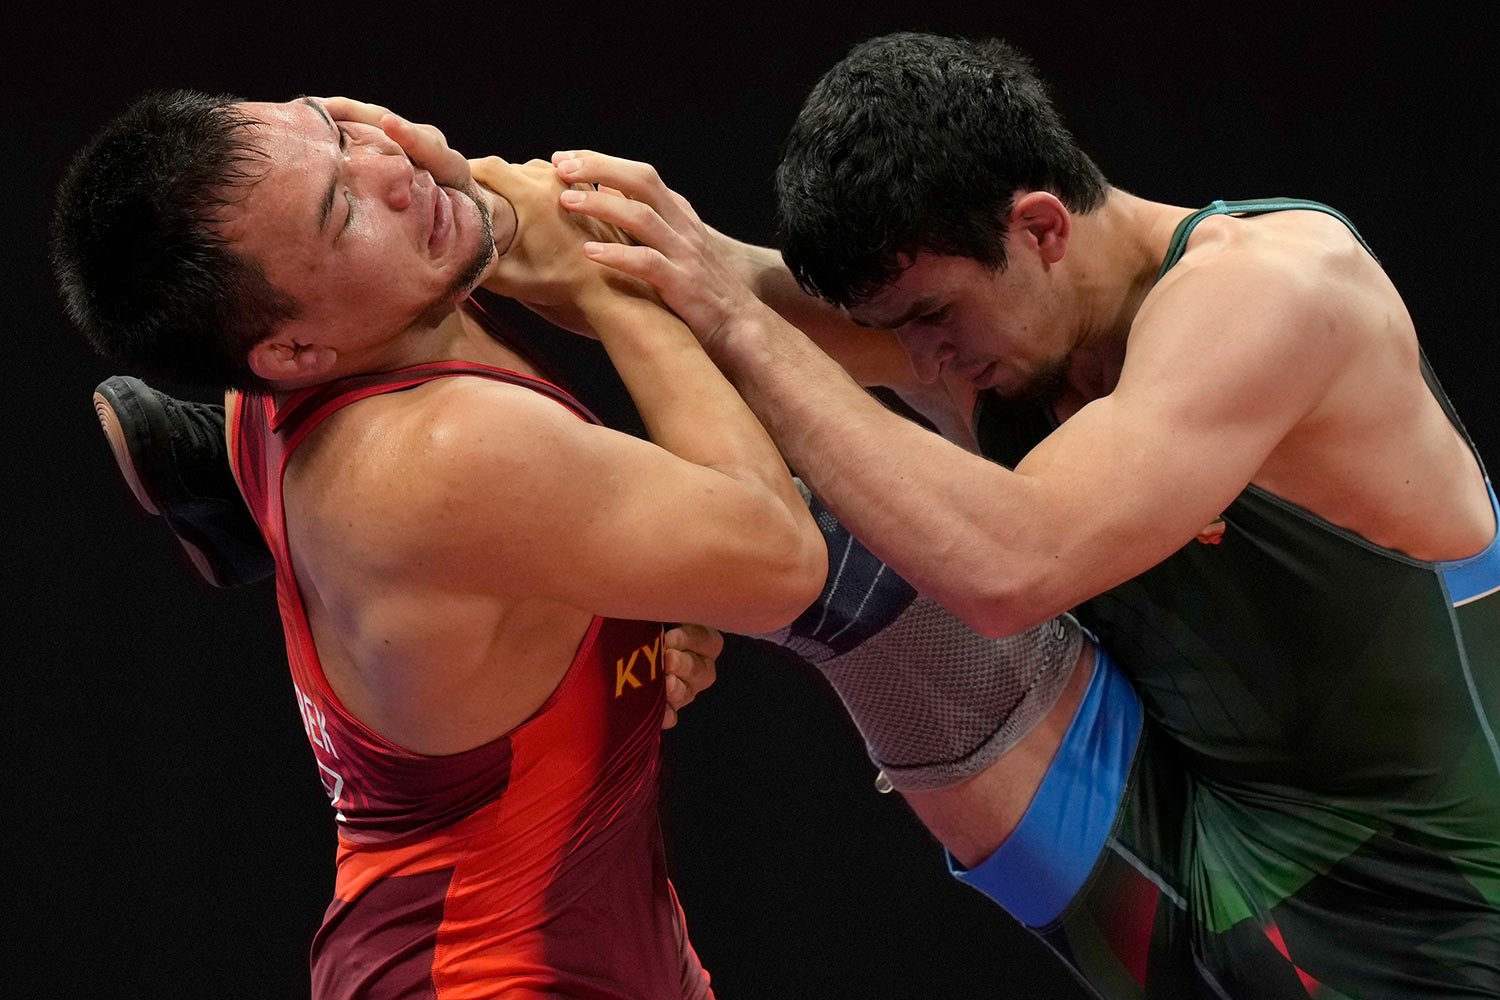  Tajikistan's Magomet Evloev, right, and Kyrgyztan's Orozbek Toktomambetov compete during their men's freestyle 74kg wrestling bronze medal match at the 19th Asian Games in Hangzhou, China, Saturday, Oct. 7, 2023. (AP Photo/Eugene Hoshiko) 